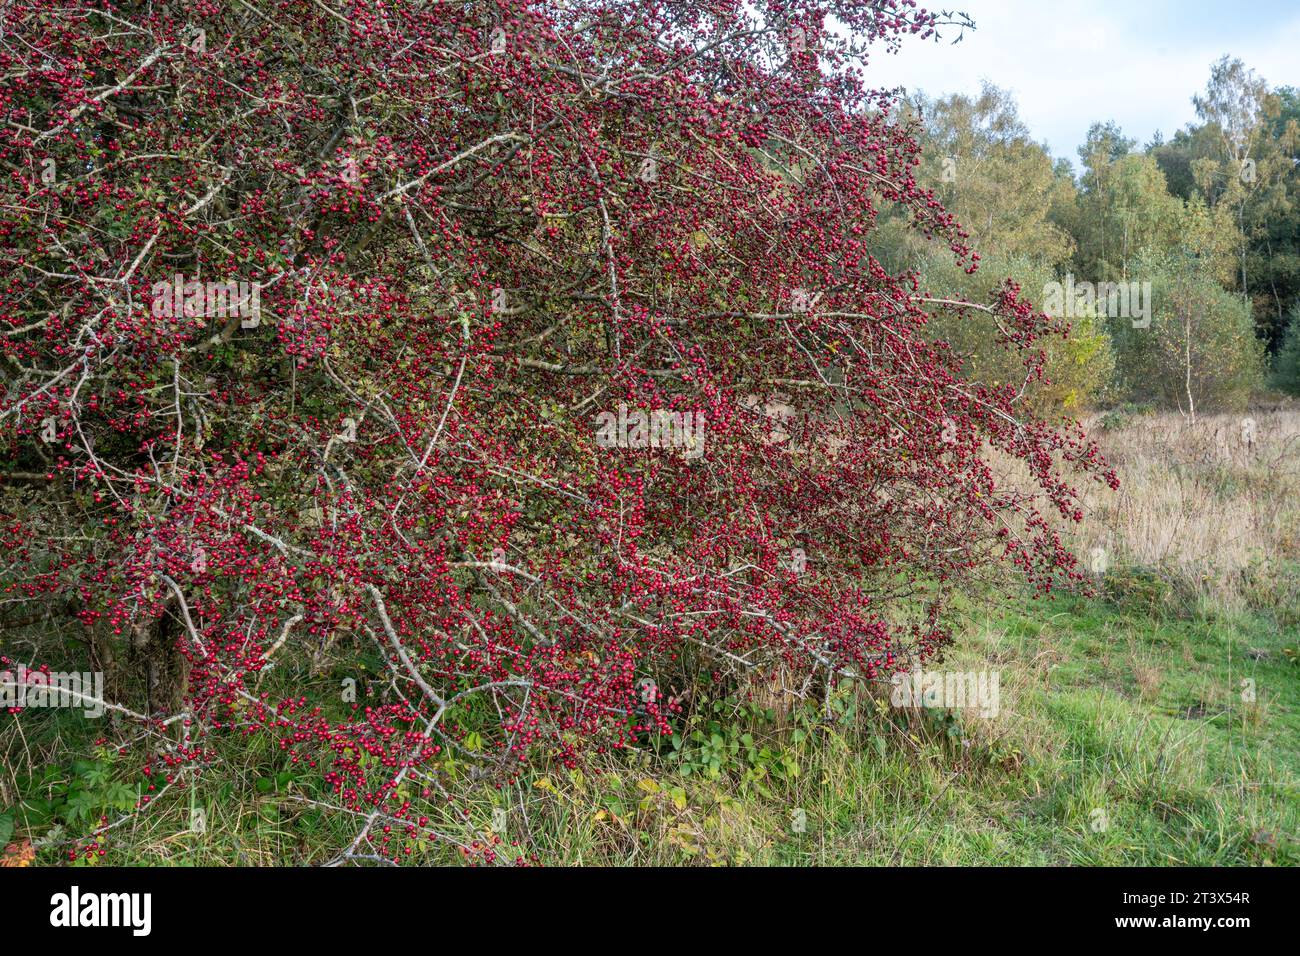 Hawthorn tree (Crataegus monogyna) covered with red berries during October or autumn, England, UK Stock Photo